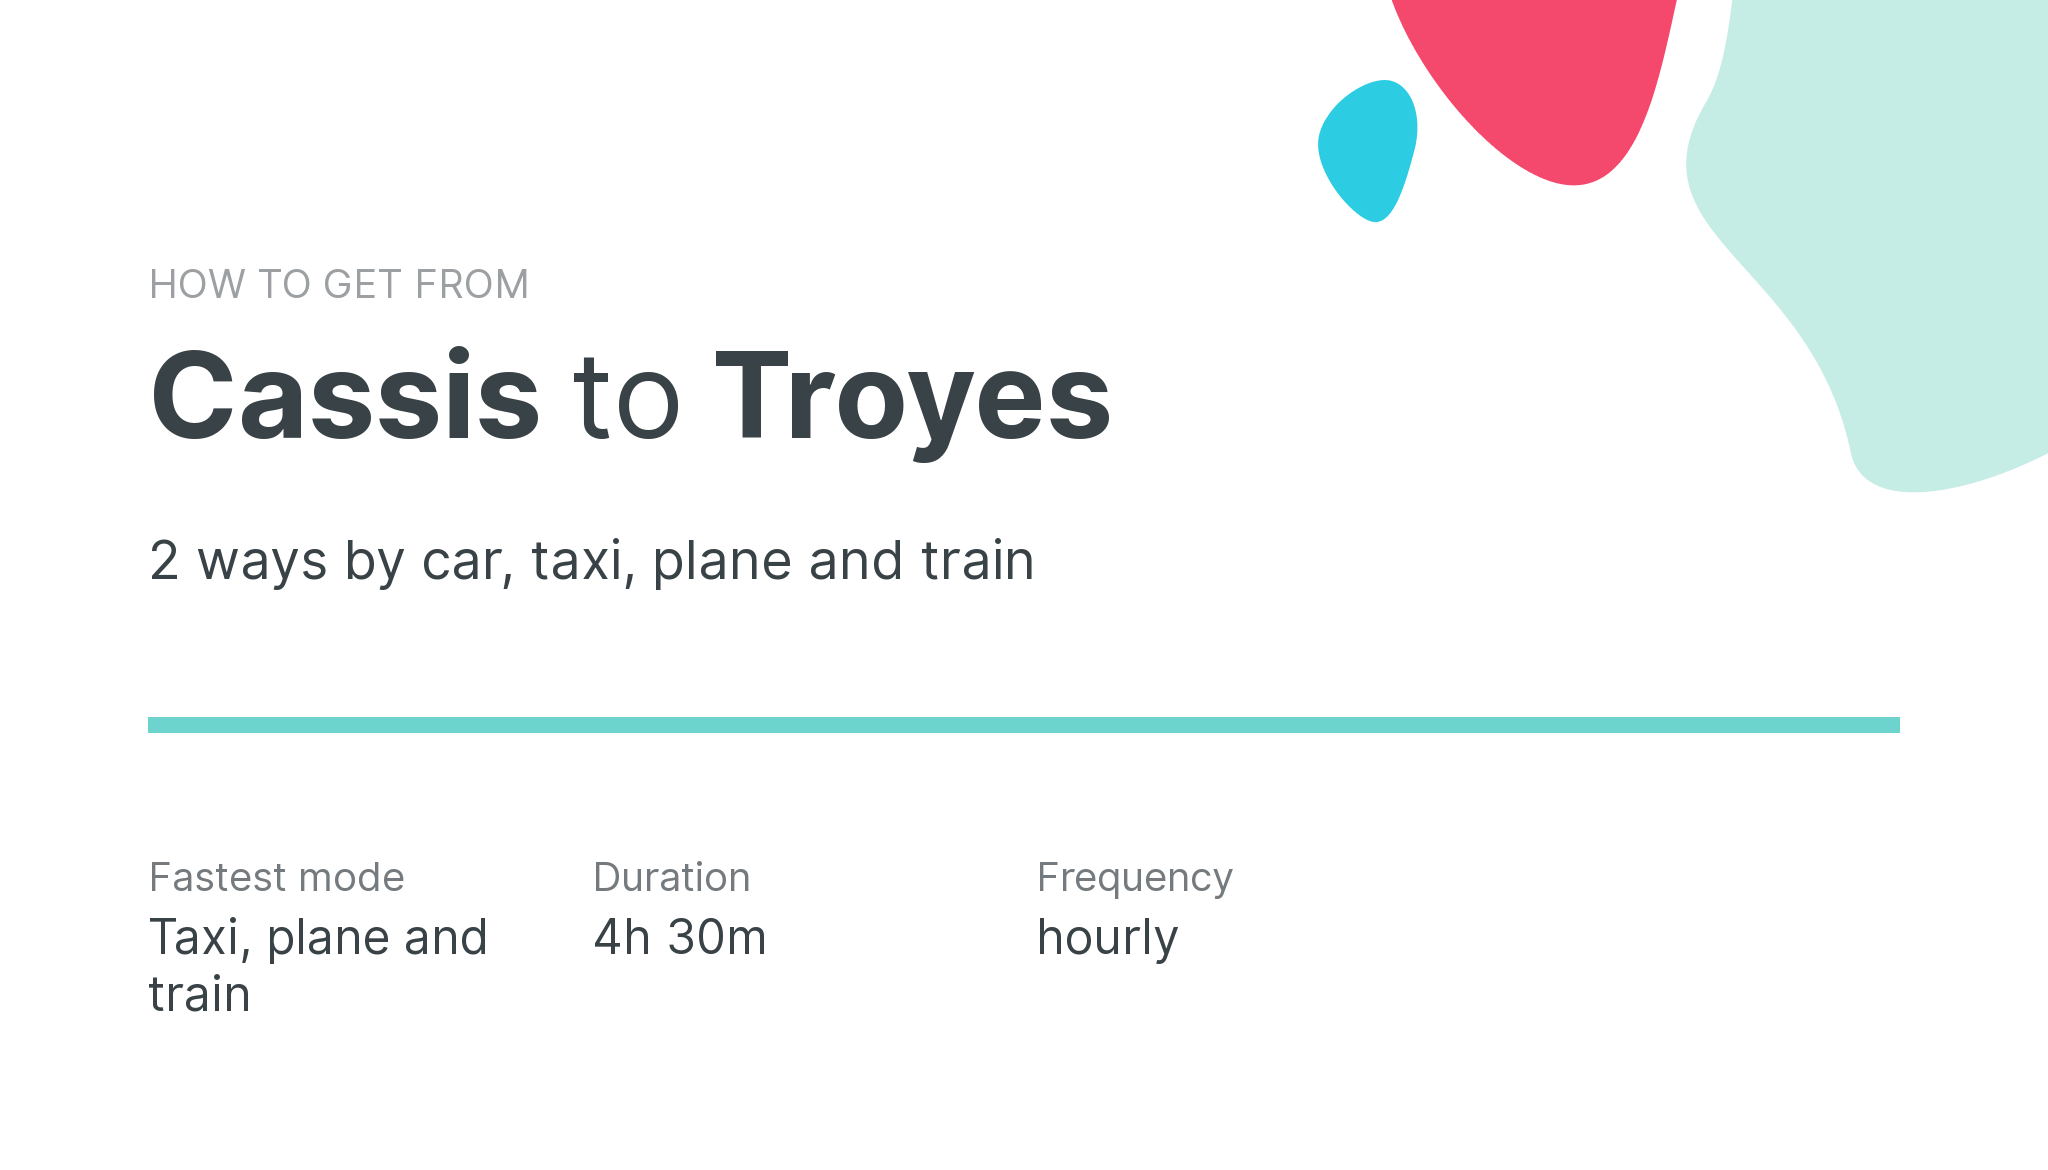 How do I get from Cassis to Troyes